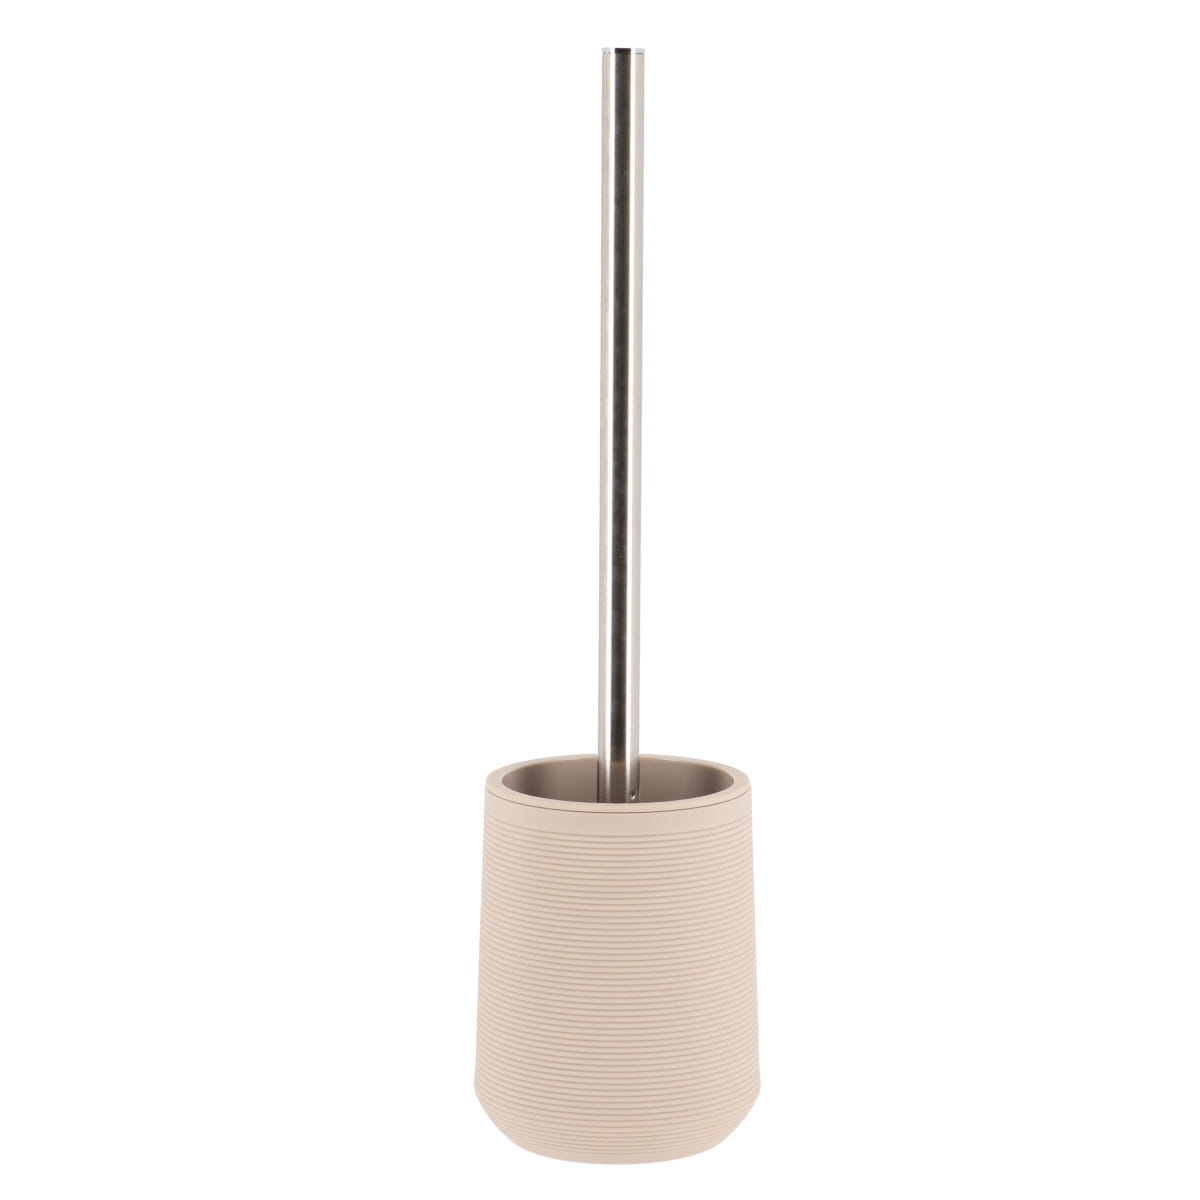 TOILET BRUSH ABS + RUBBER WIH STRIPES- TAUPE